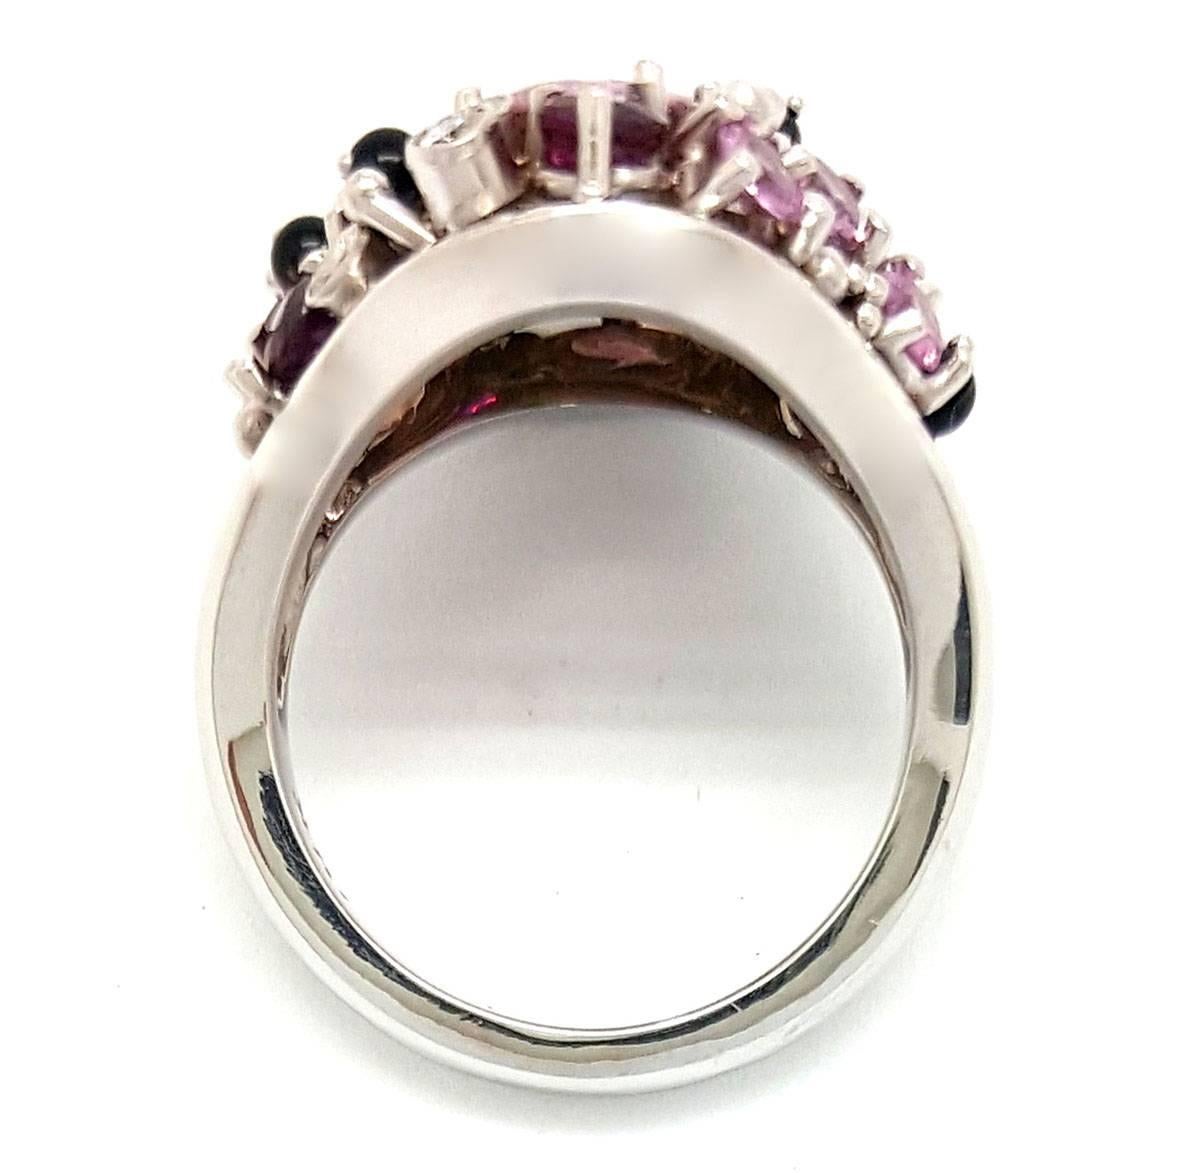 Women's Marvelous 14k White Gold, Pink Sapphire & Diamond Confetti Cocktail Ring For Sale